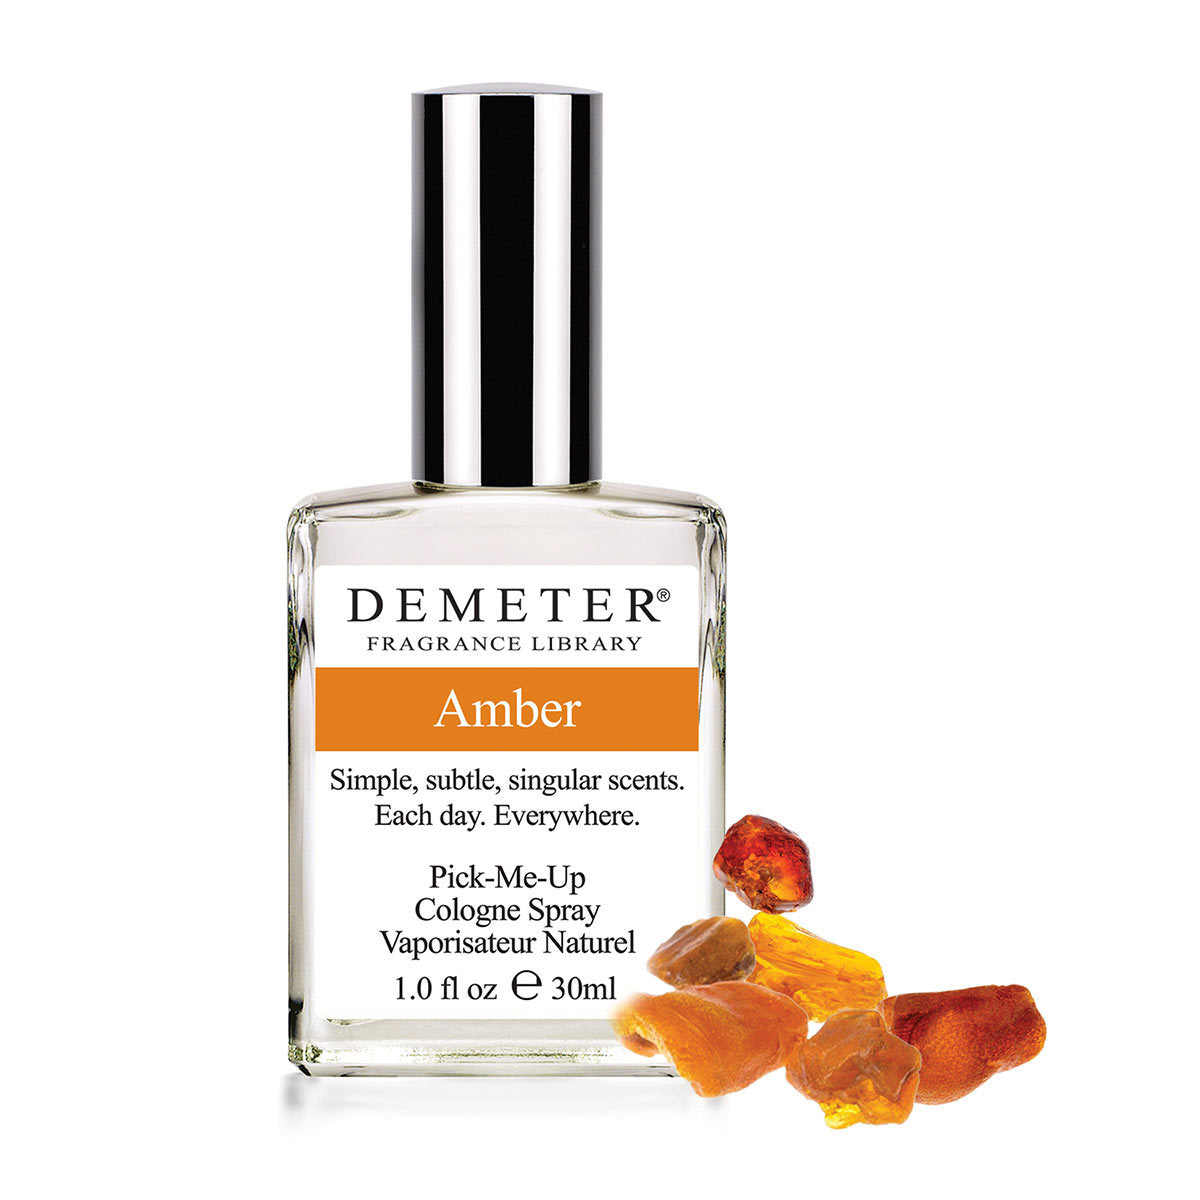 Primary image of Amber Cologne Spray